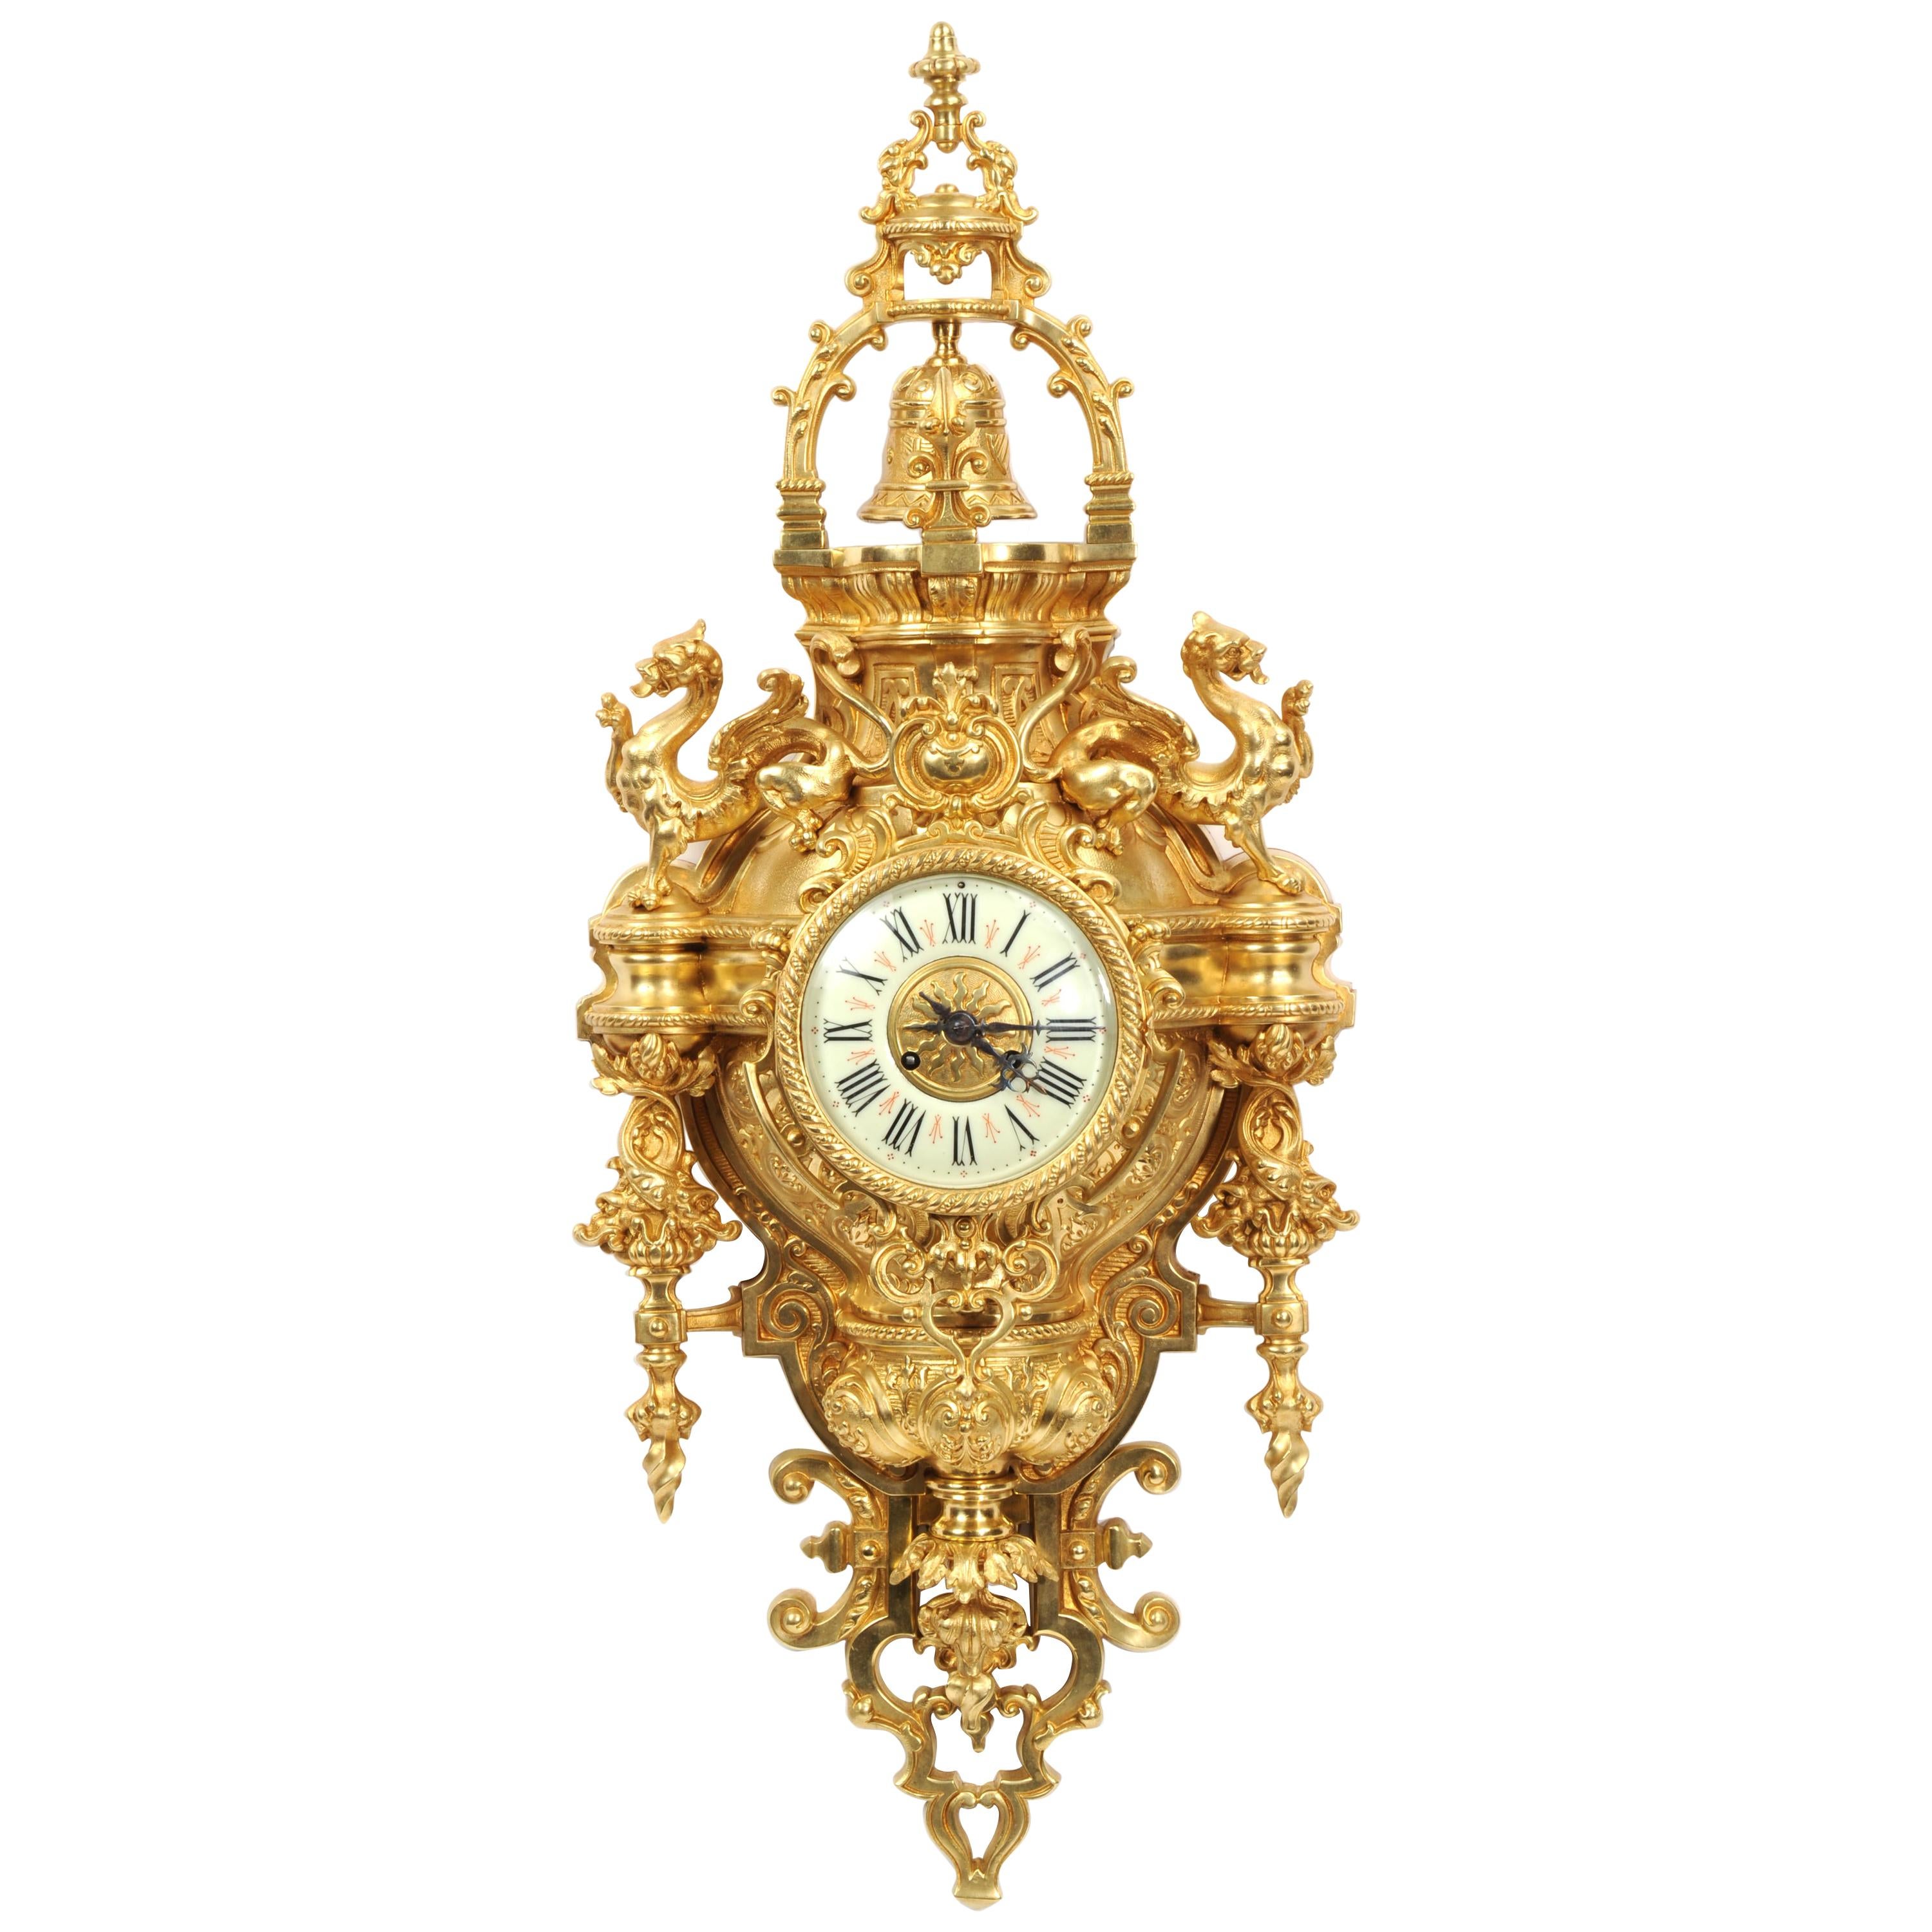 Huge Antique French Gilt Bronze Cartel Wall Clock with Dragons